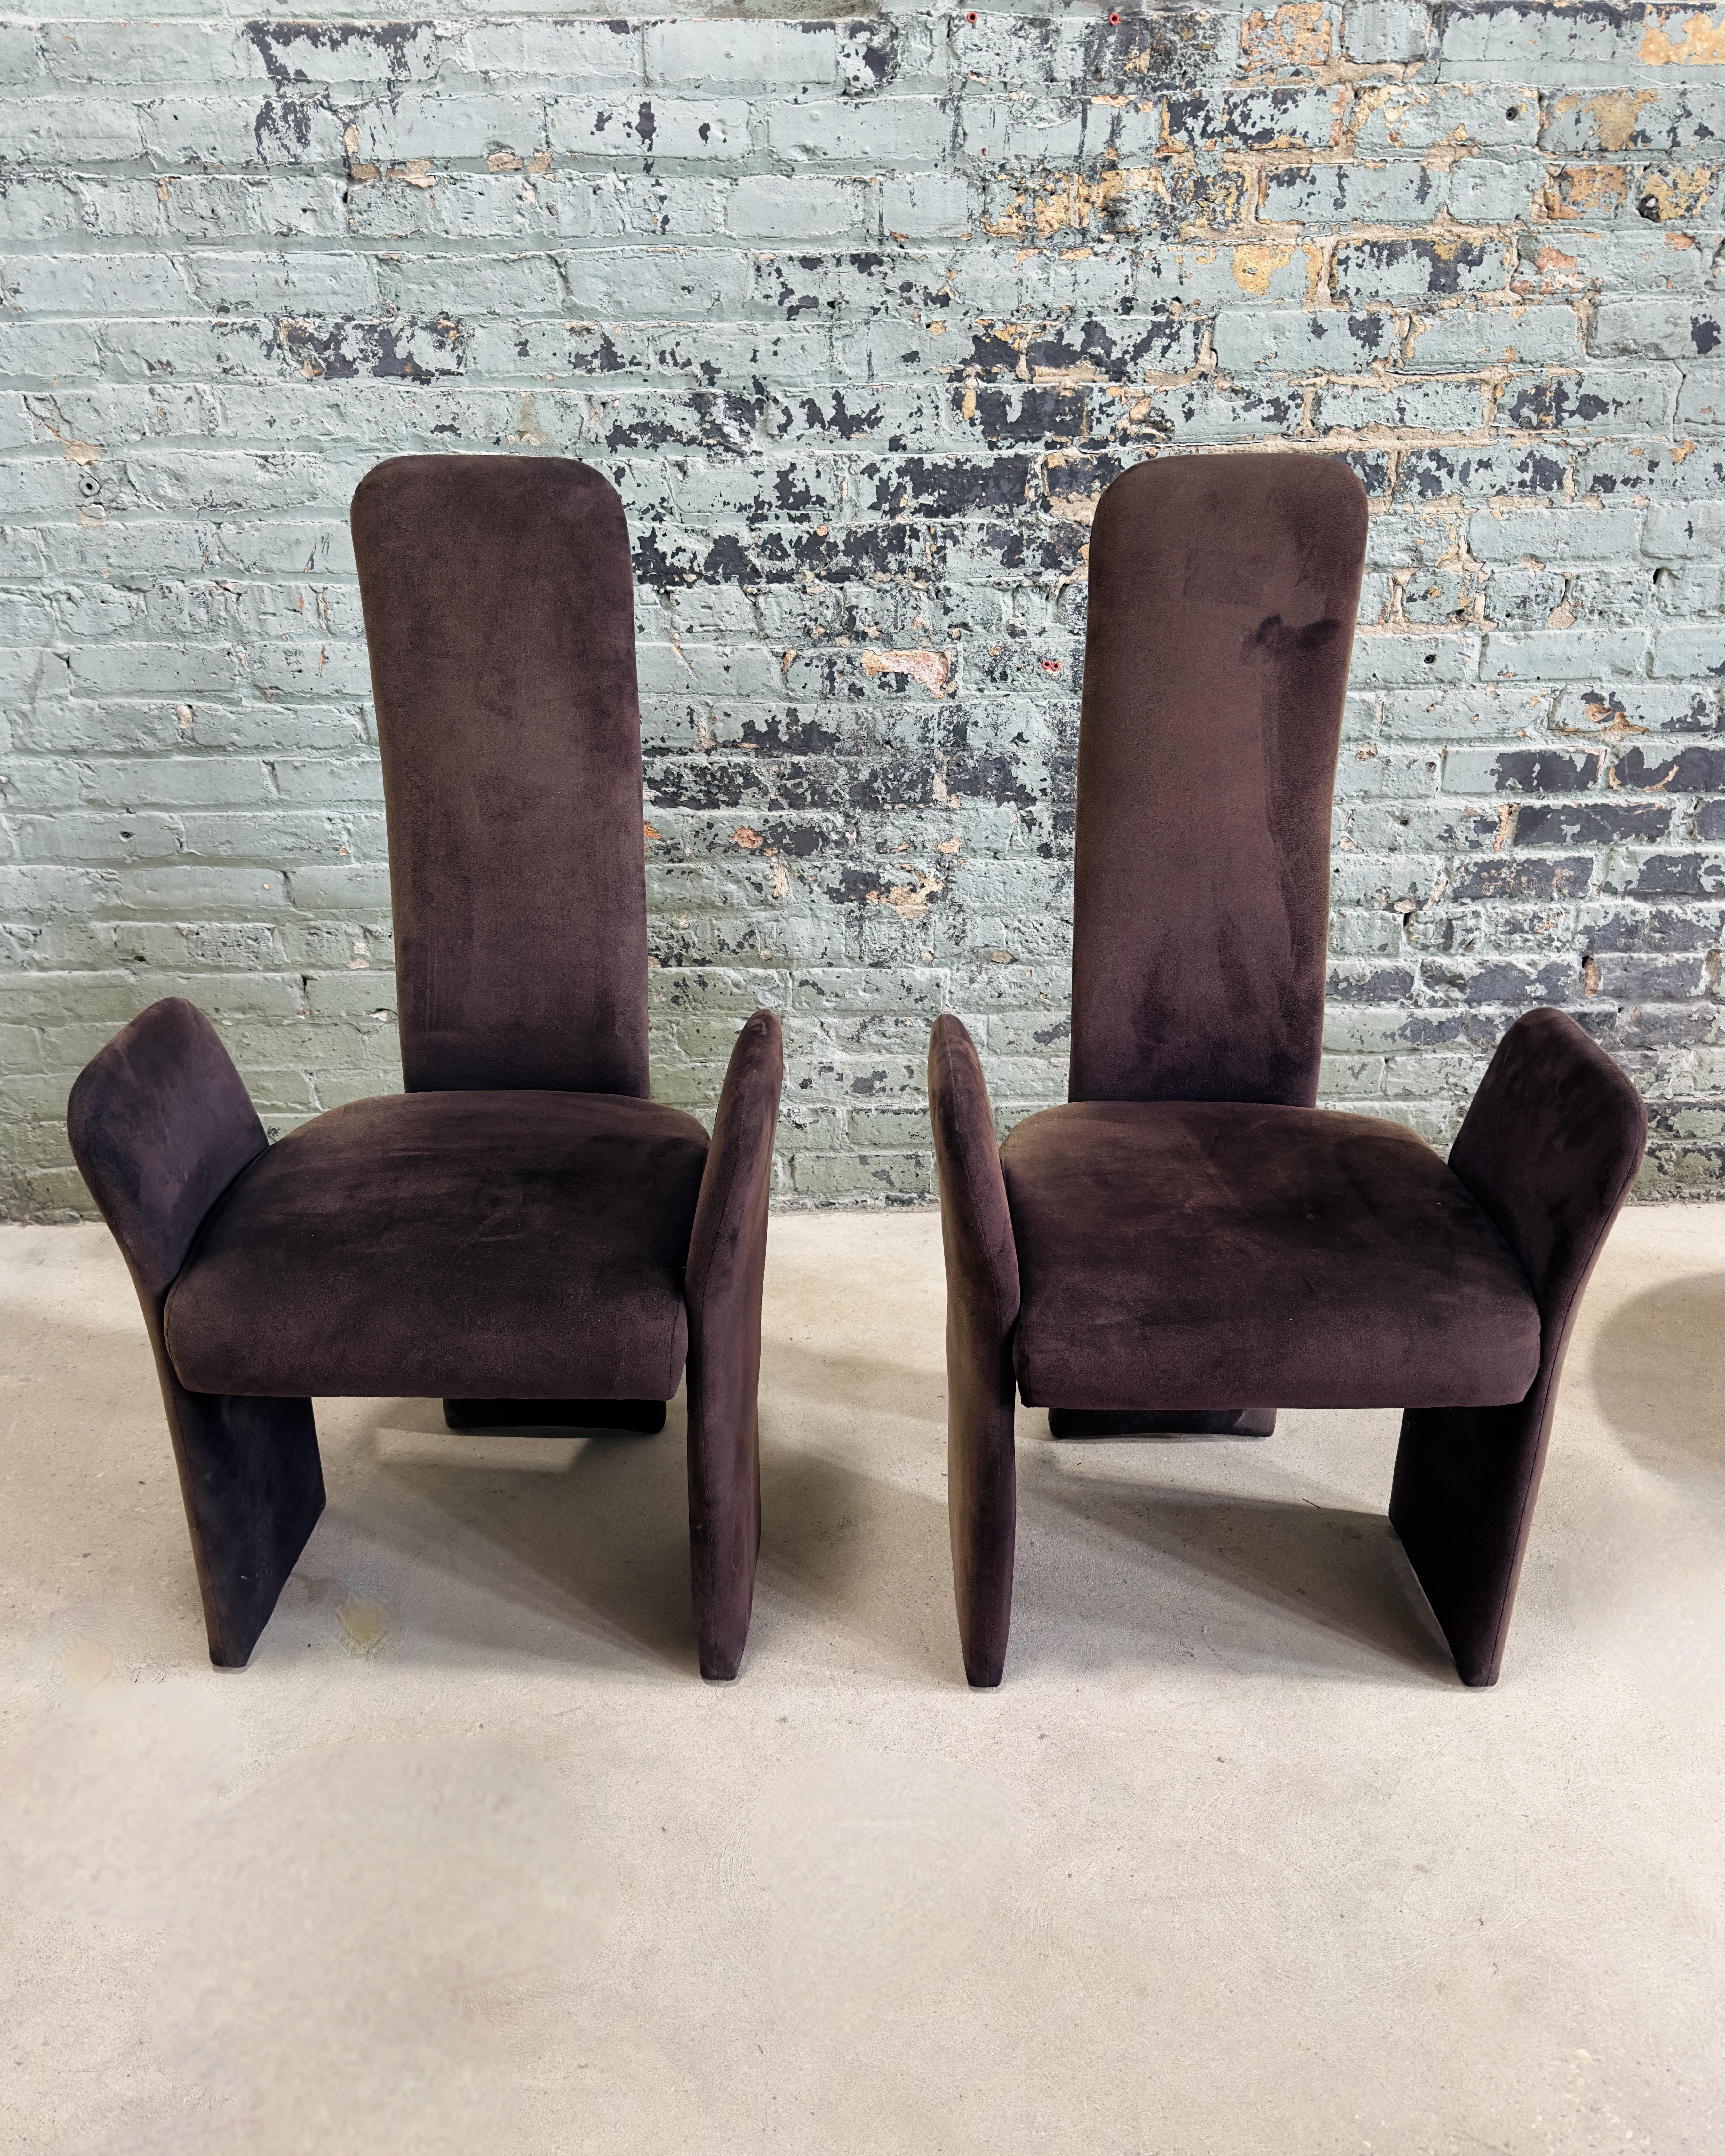 Pair of Post Modern Sculptural Dining Chairs, 1980.  Original upholstery.